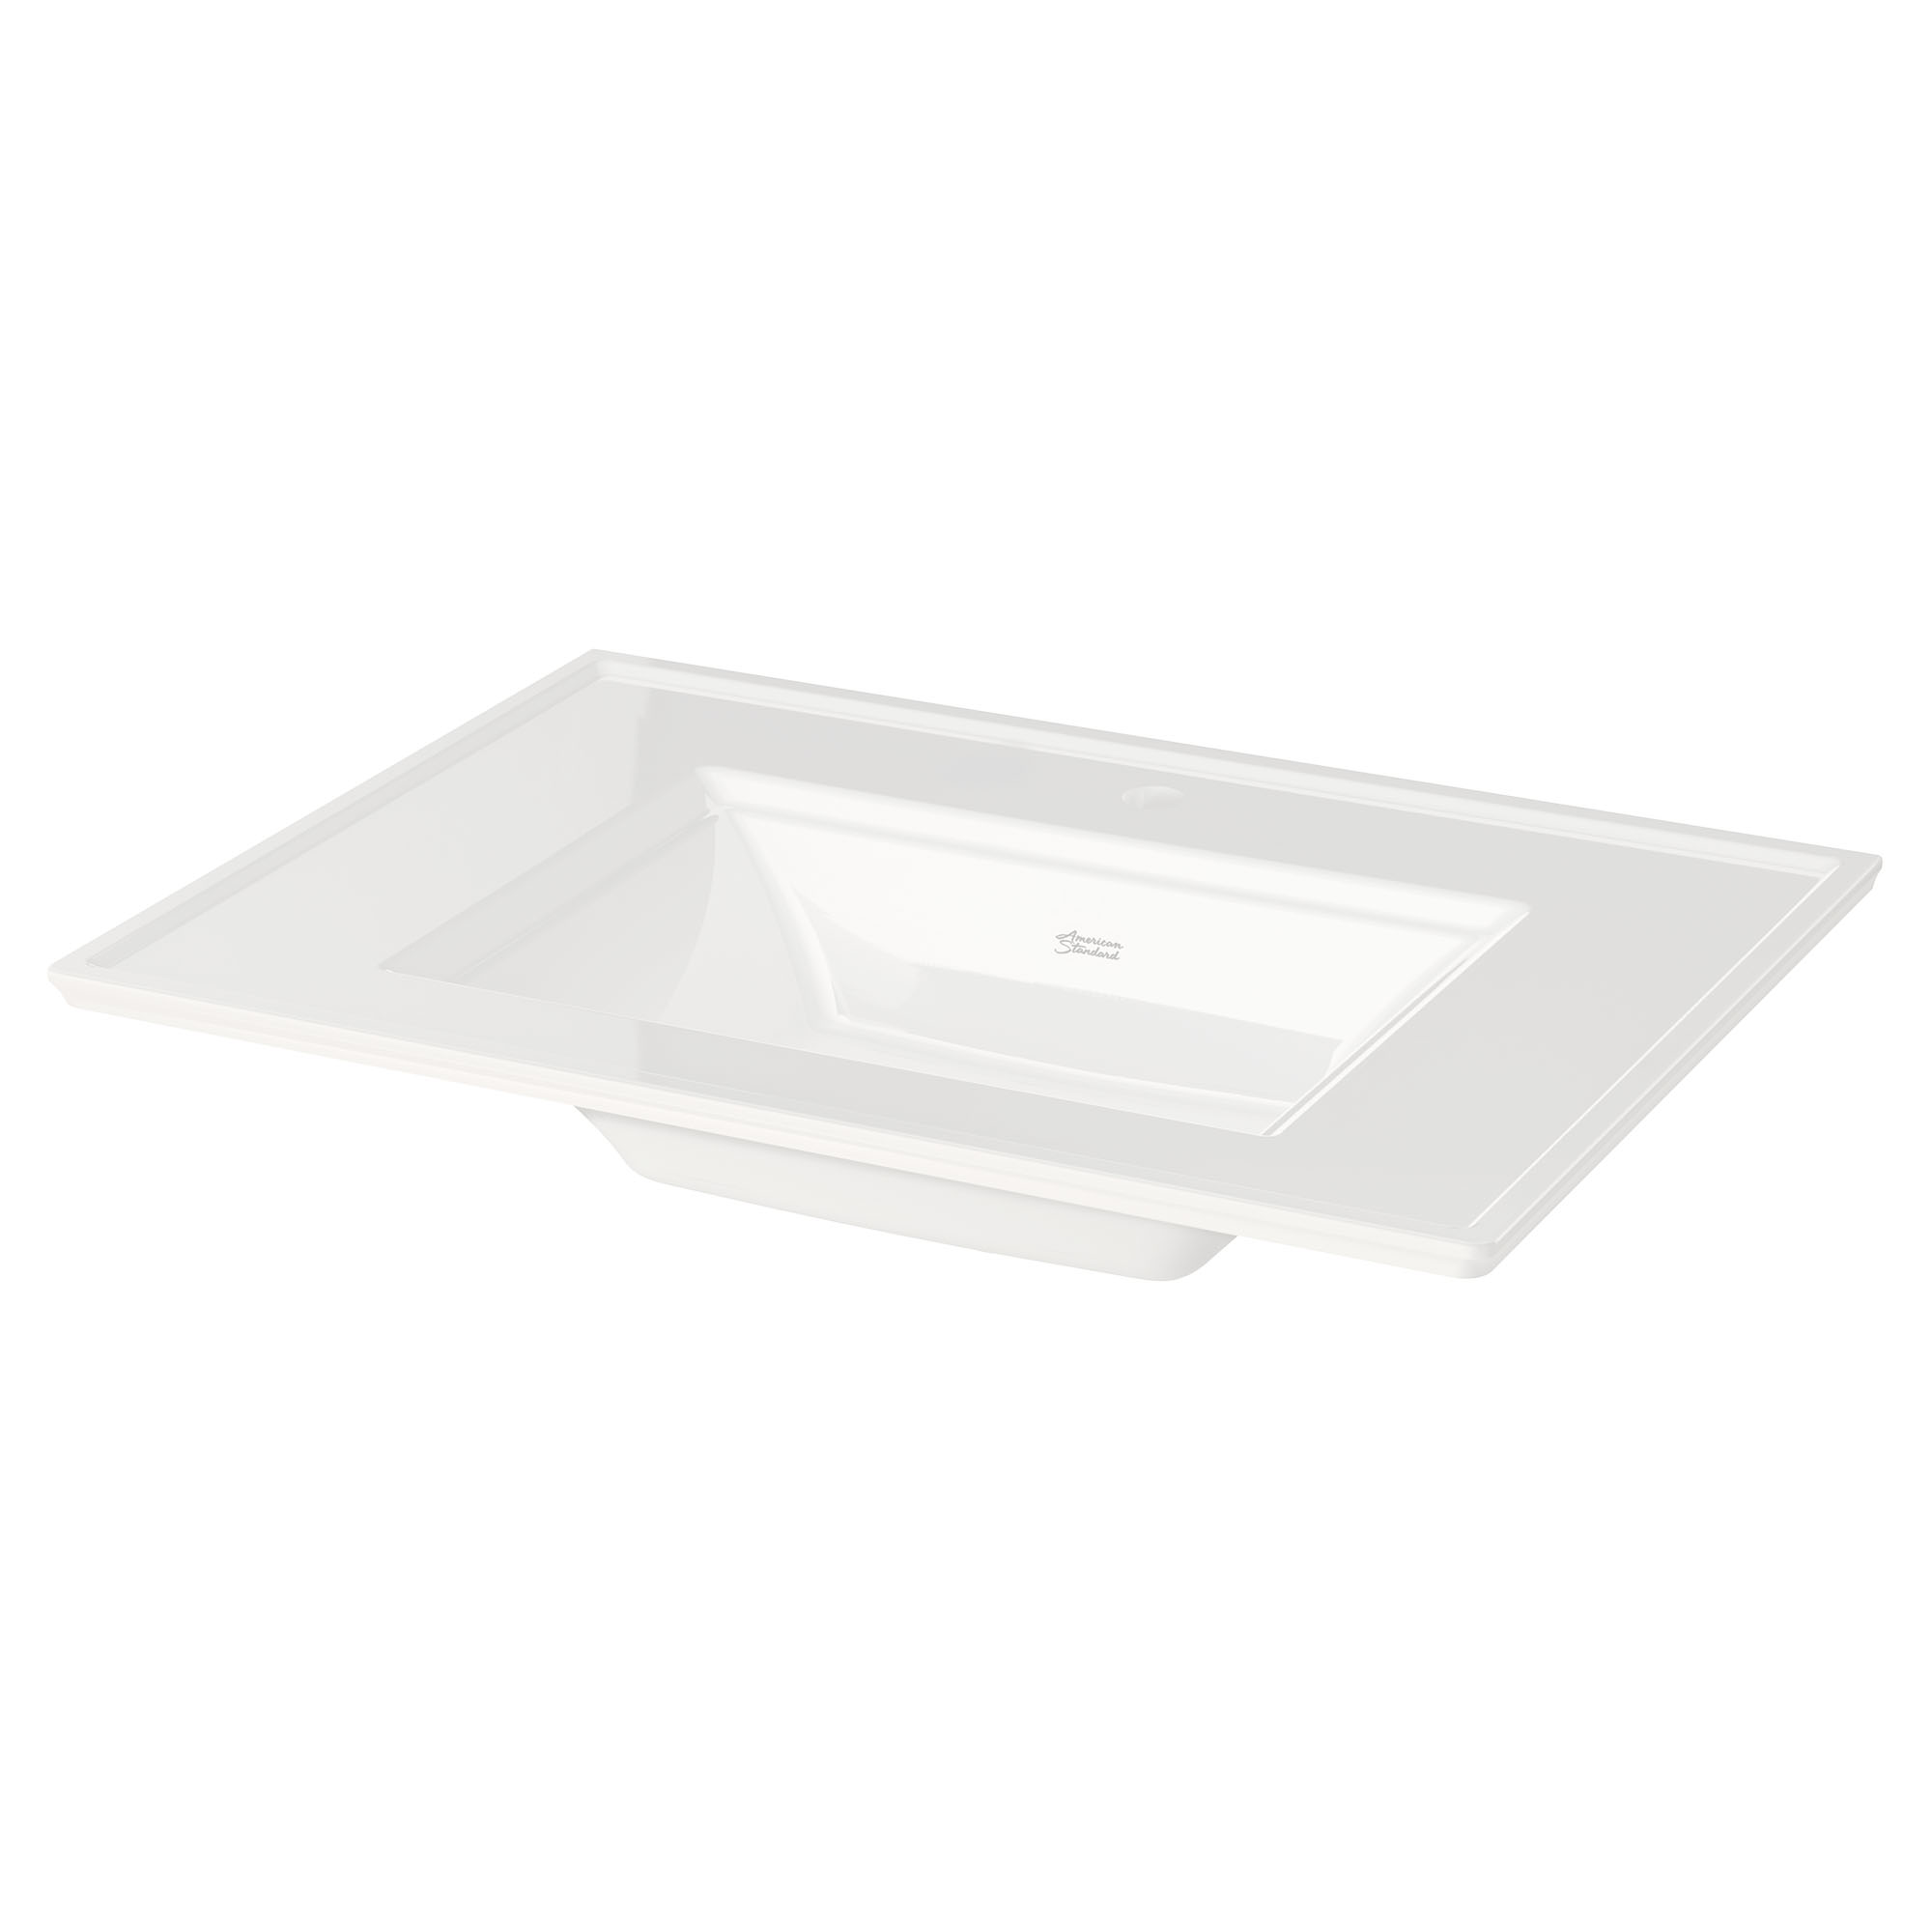 Town Square™ S Console Vanity Sink Top Center Hole Only